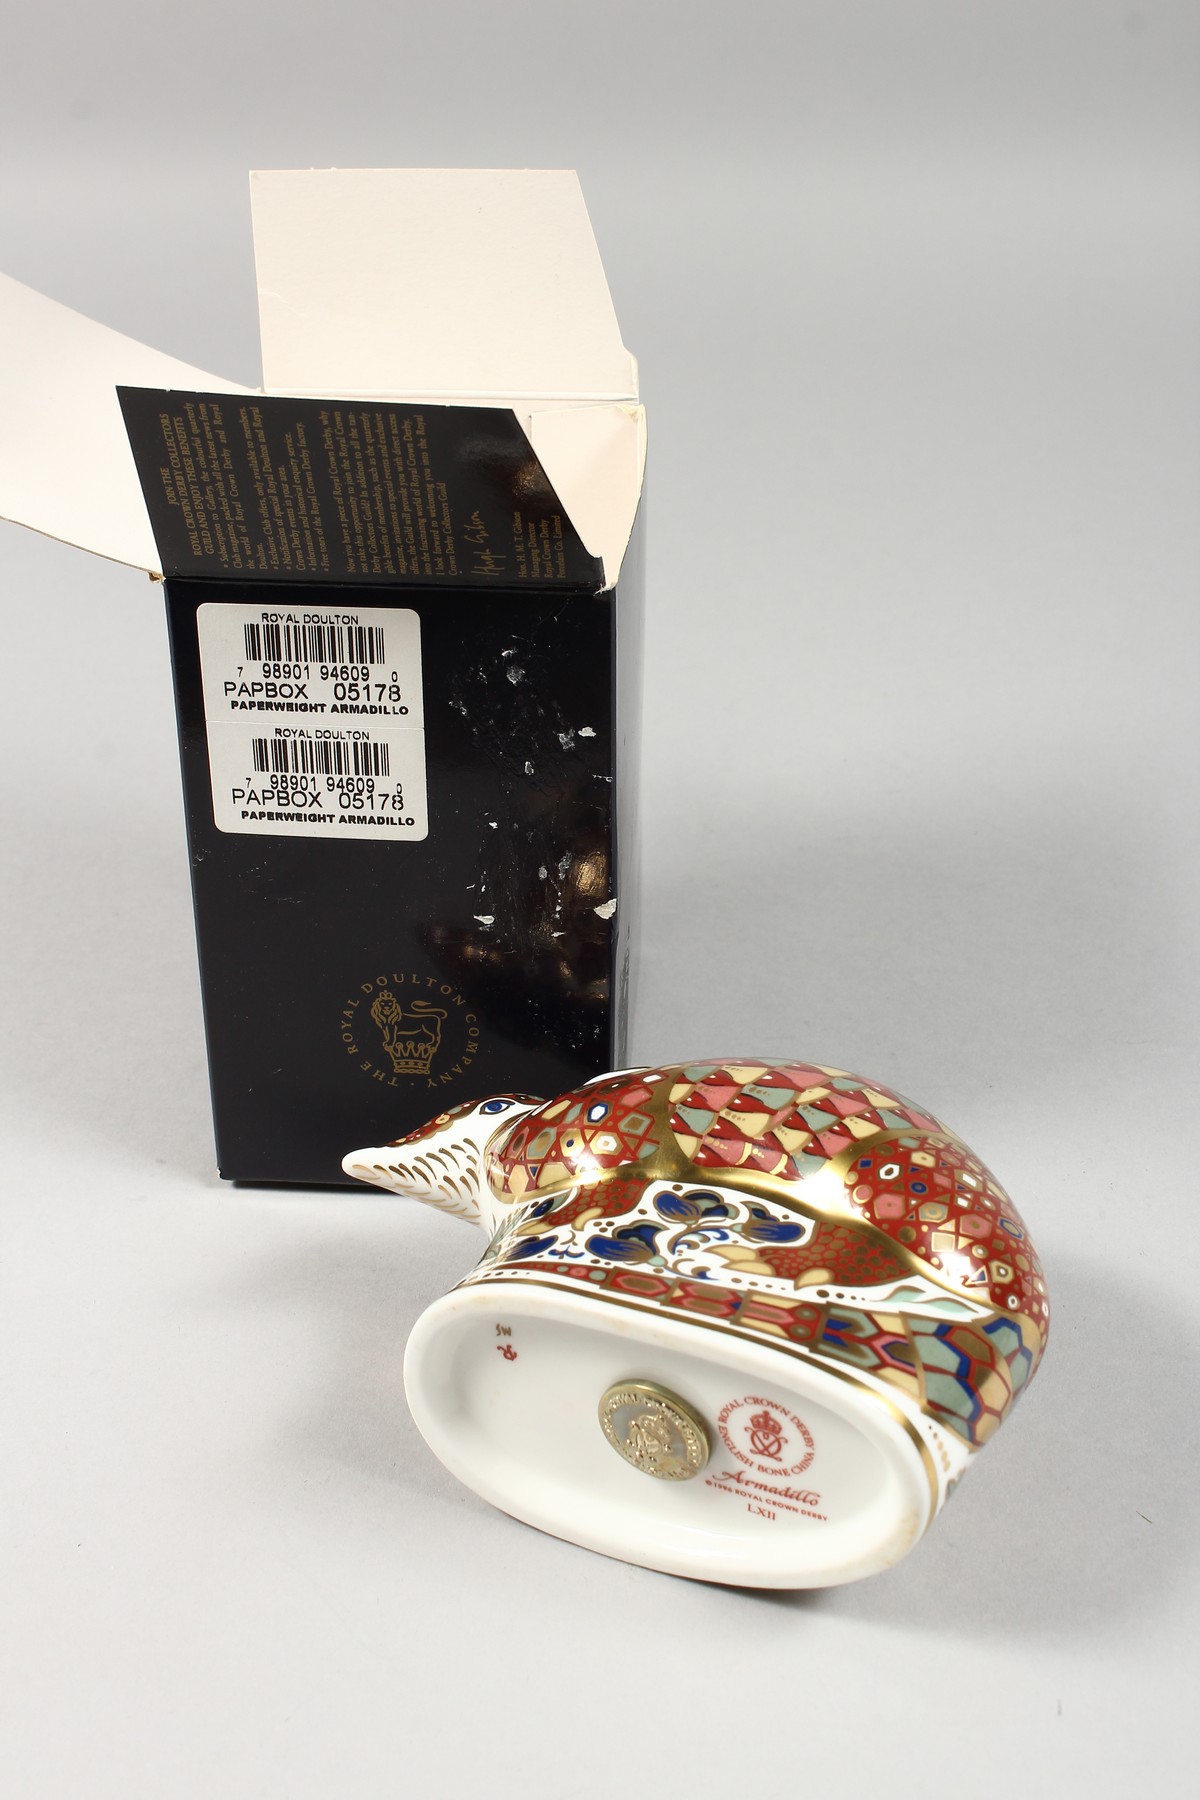 A ROYAL CROWN DERBY PAPERWEIGHT ARMADILLO, gold stopper and box. - Image 6 of 7